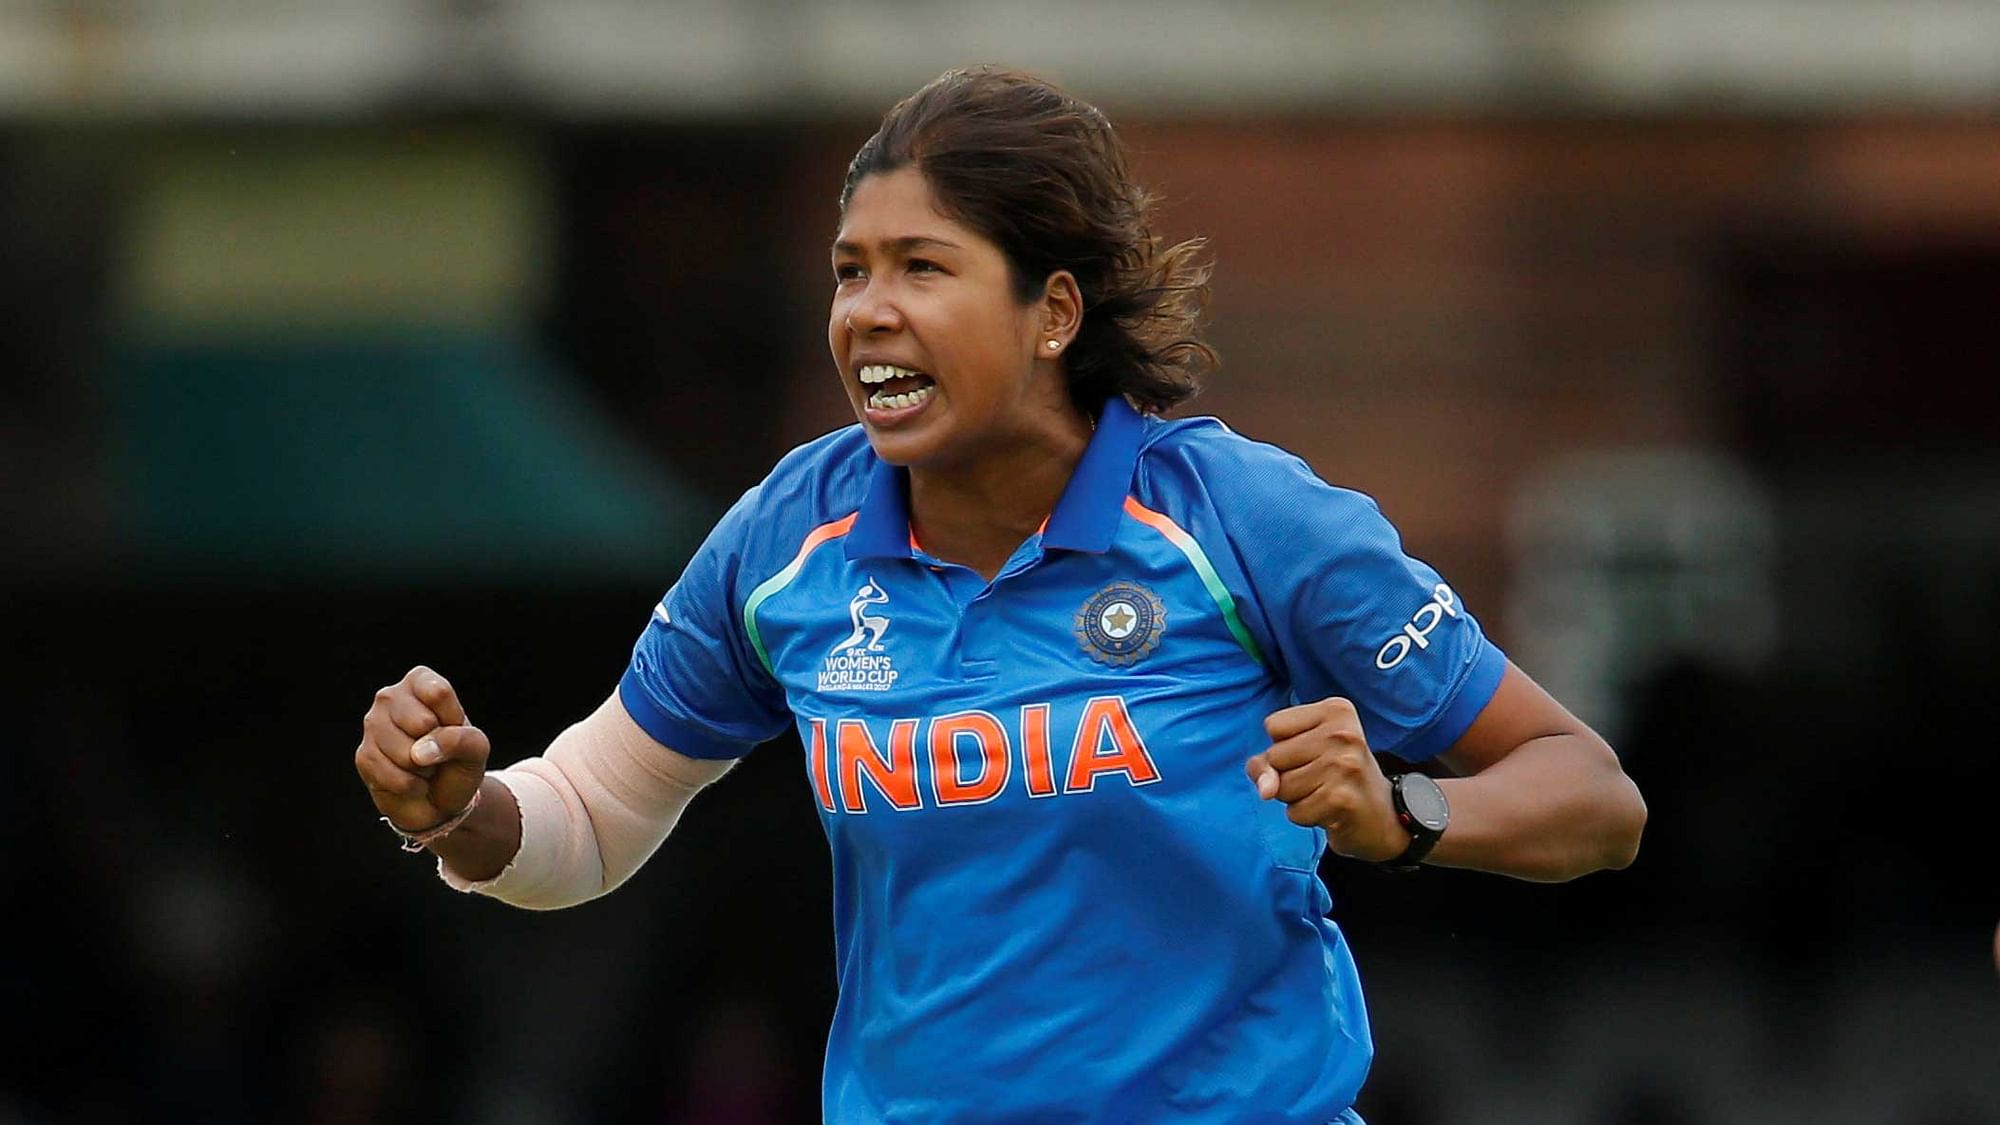 Jhulan Goswami is the world’s highest wicket-taker among women in the one-day format.